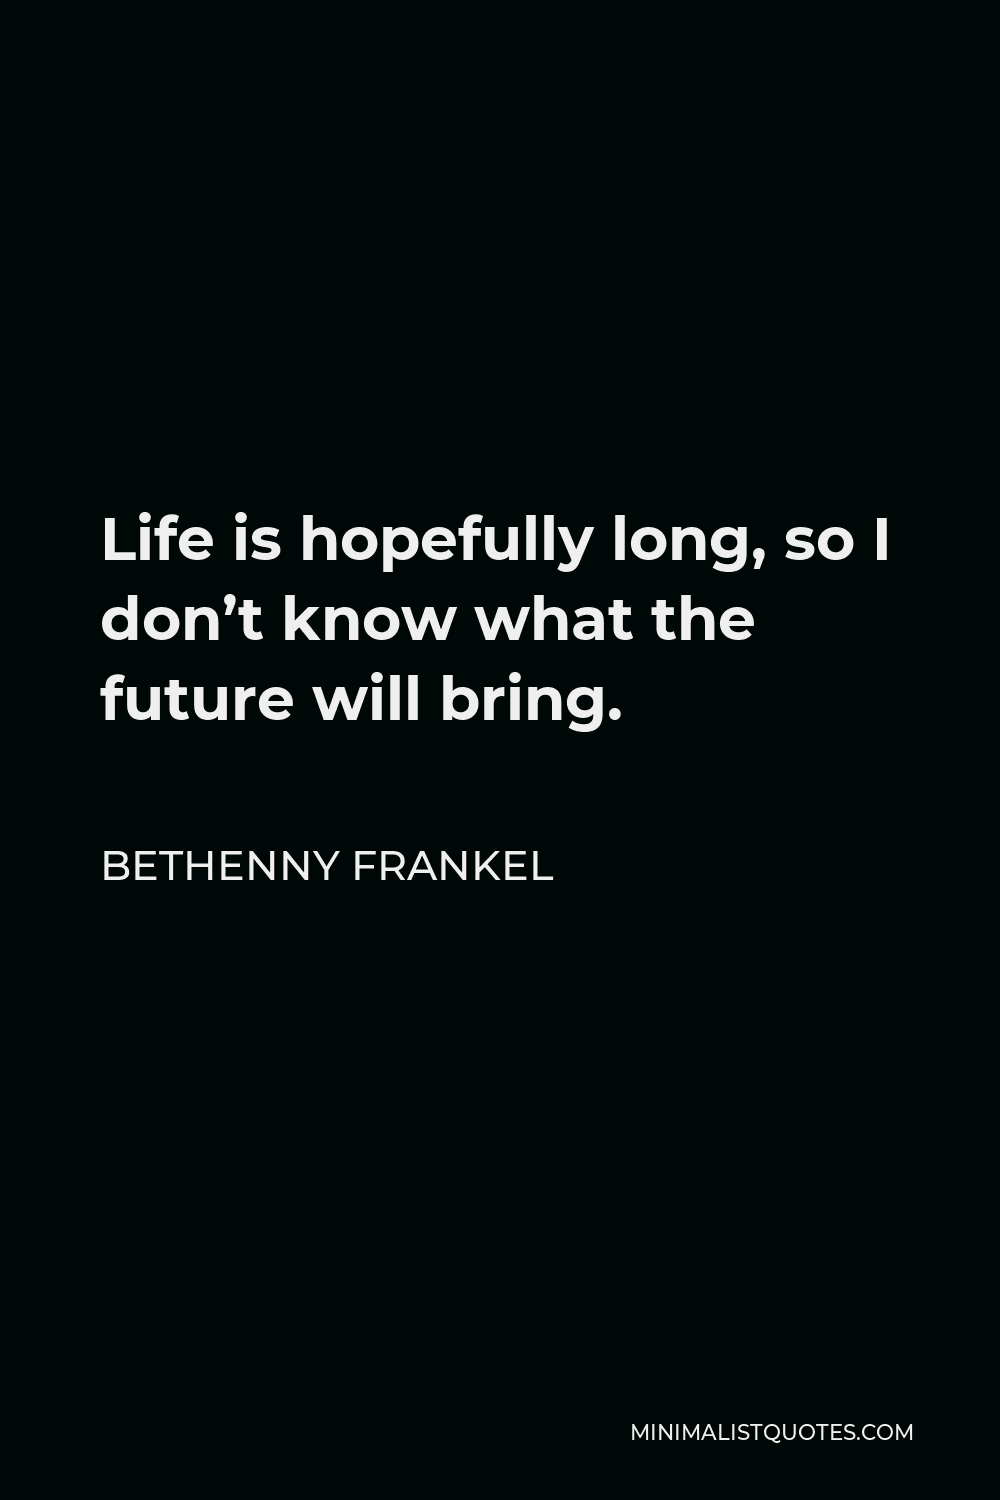 Bethenny Frankel Quote - Life is hopefully long, so I don’t know what the future will bring.